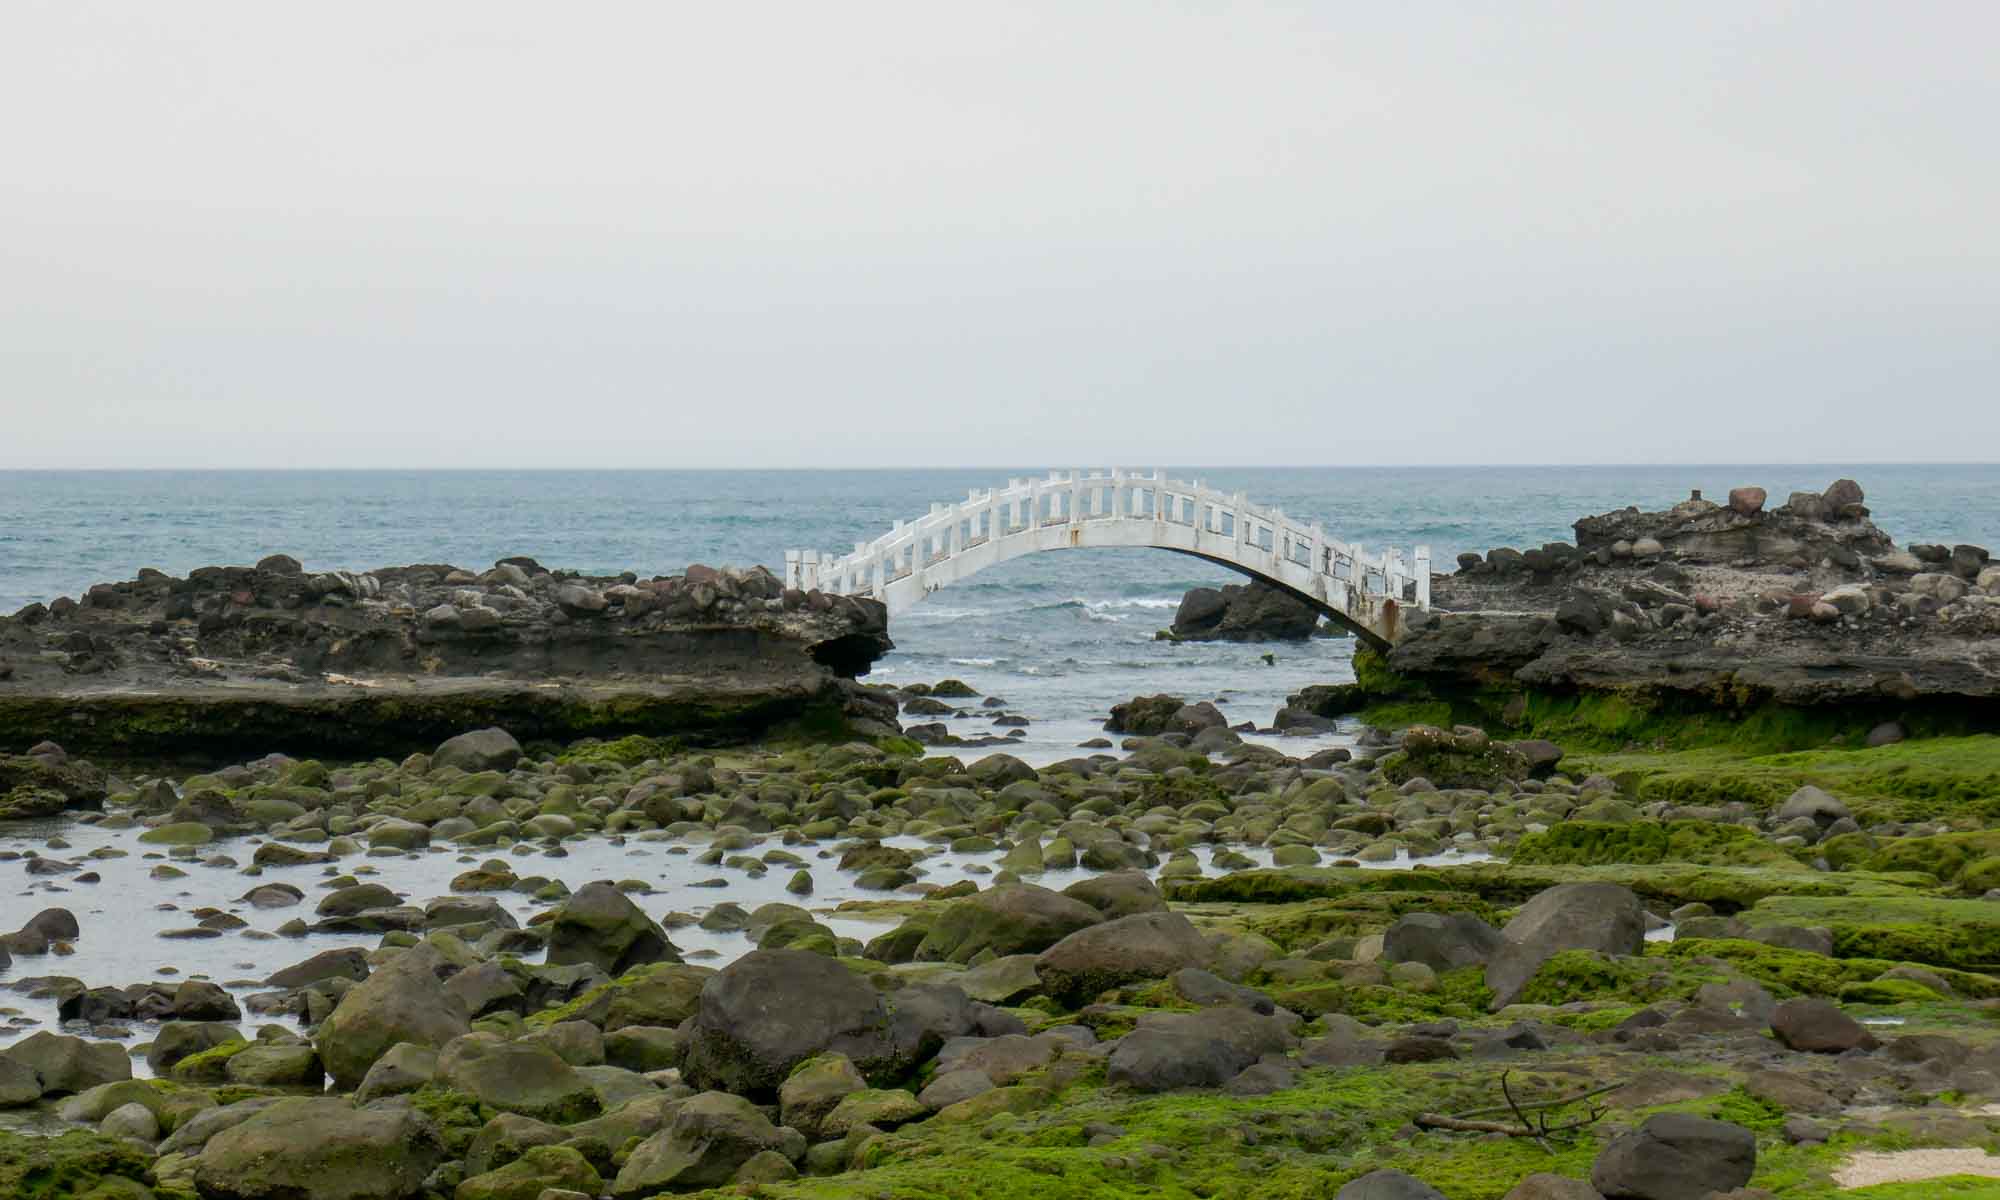 Small bridge in the sea behind the arch